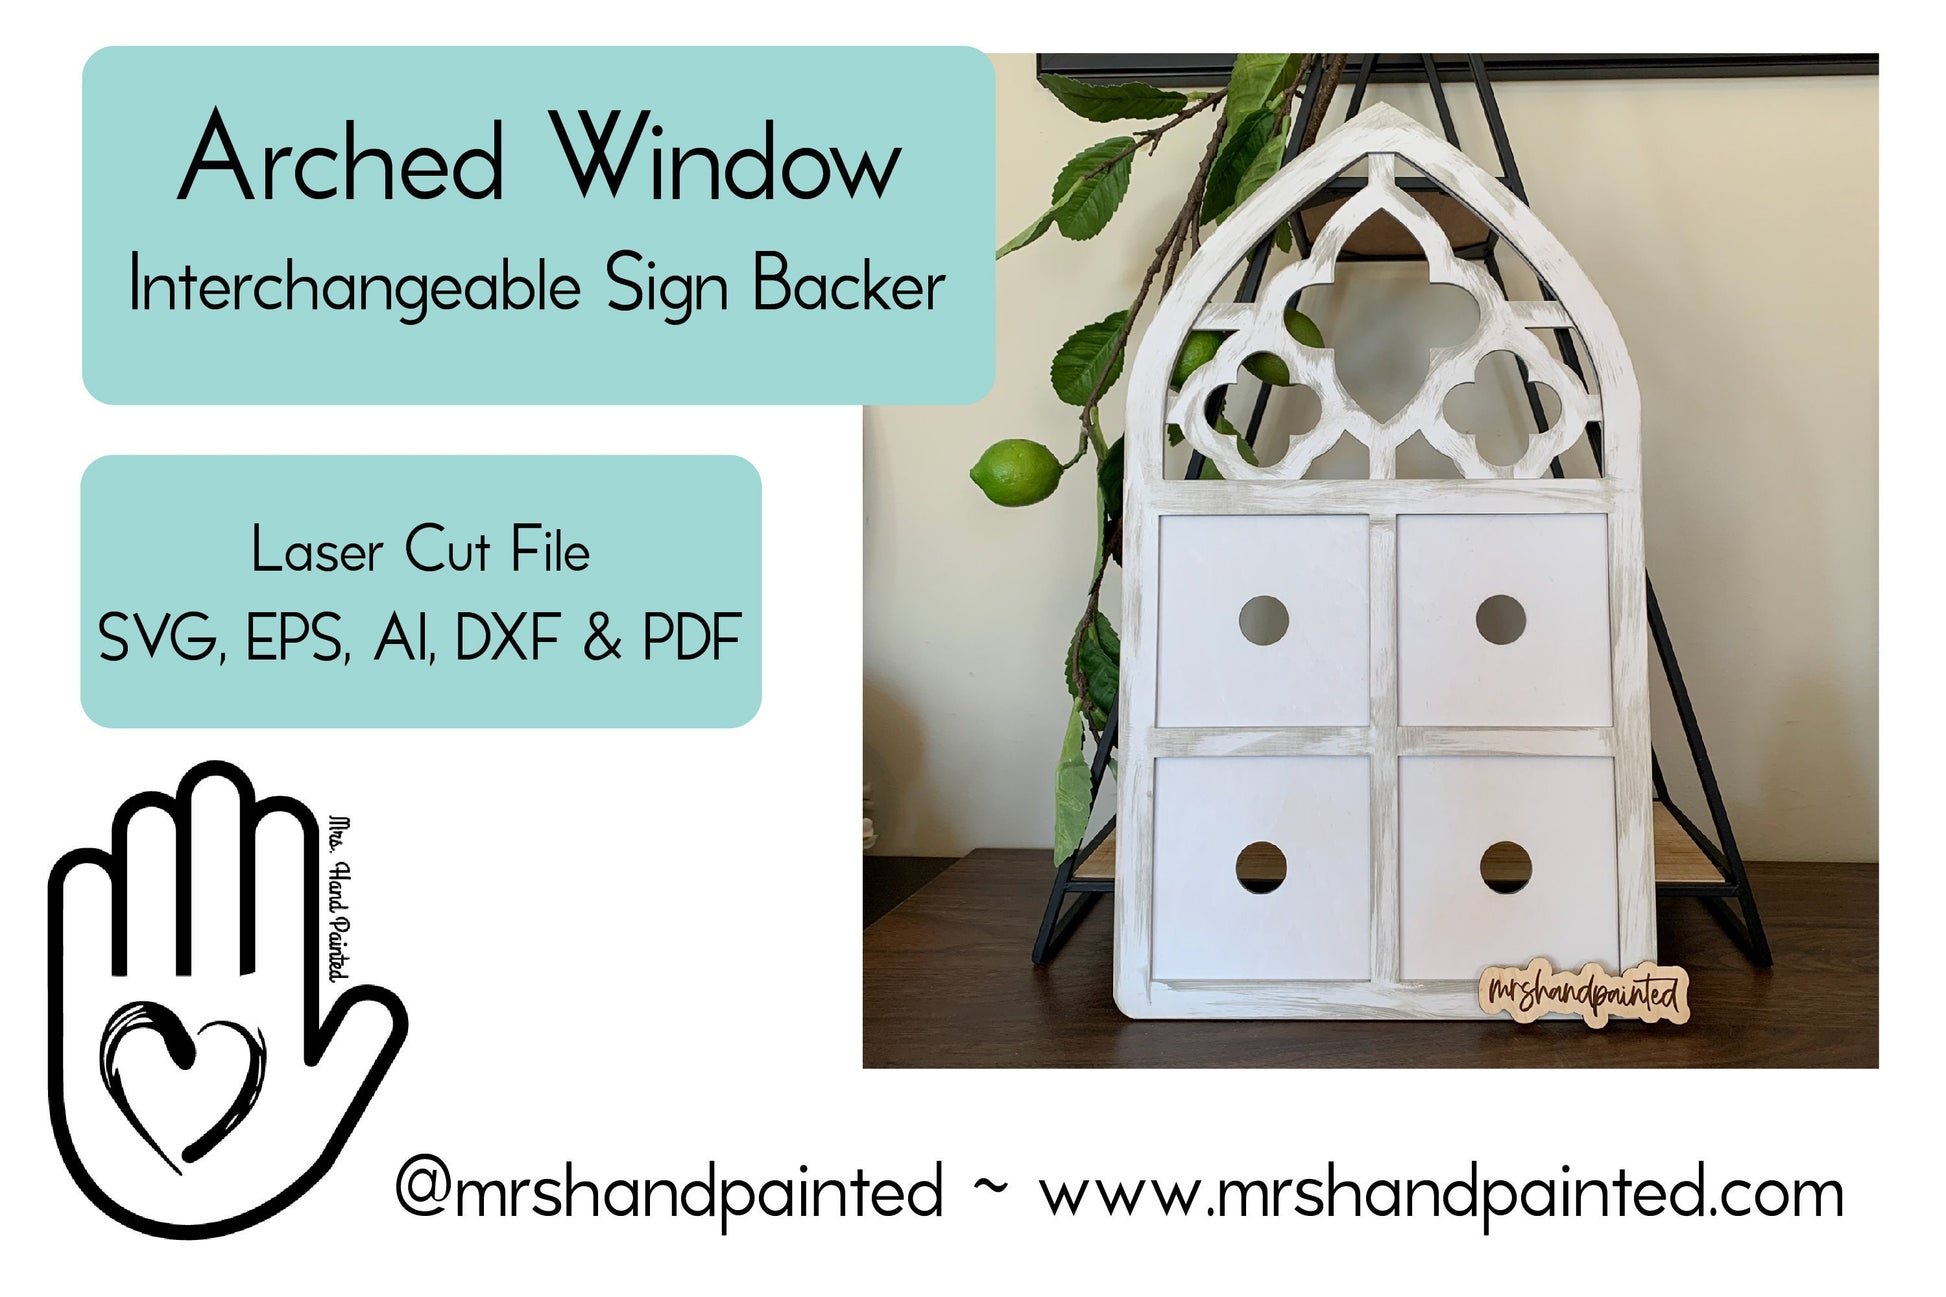 Laser Cut File - Arched Window Interchangeable Sign Backer - Digital Download SVG, DXF, AI files